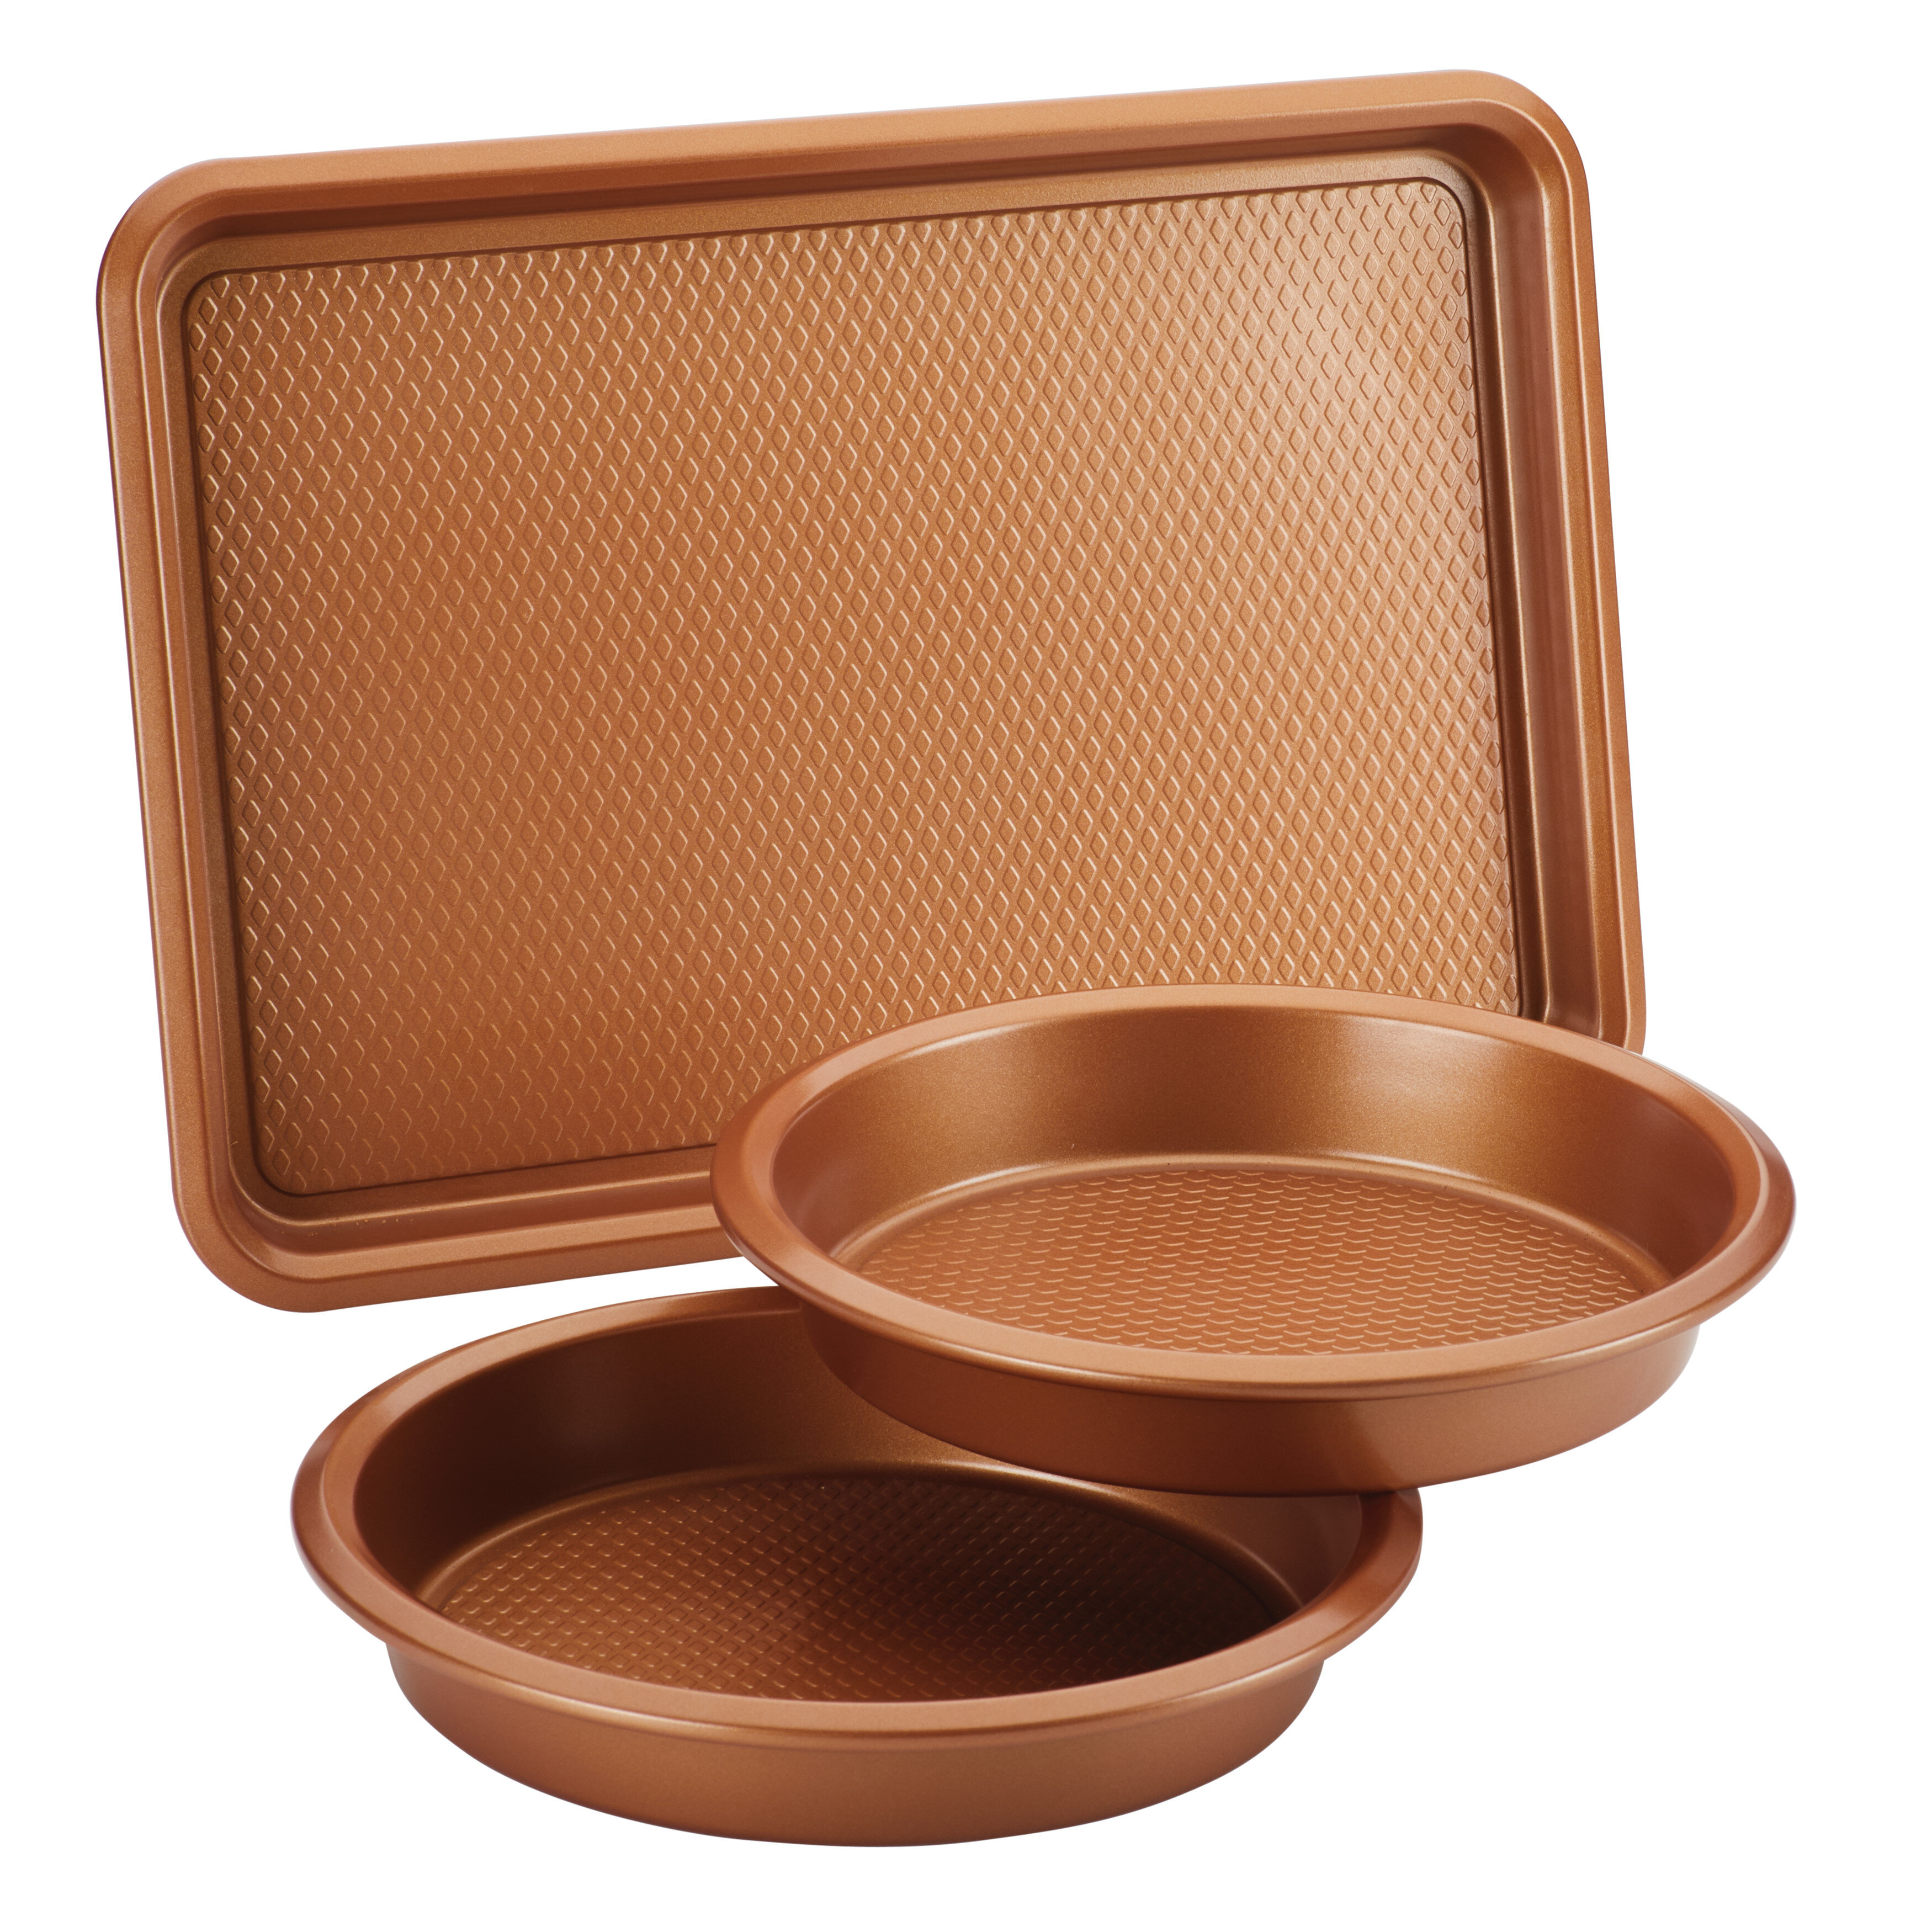 Ayesha Bakeware Loaf Pan, 9-Inch x 5-Inch, Copper, Brown